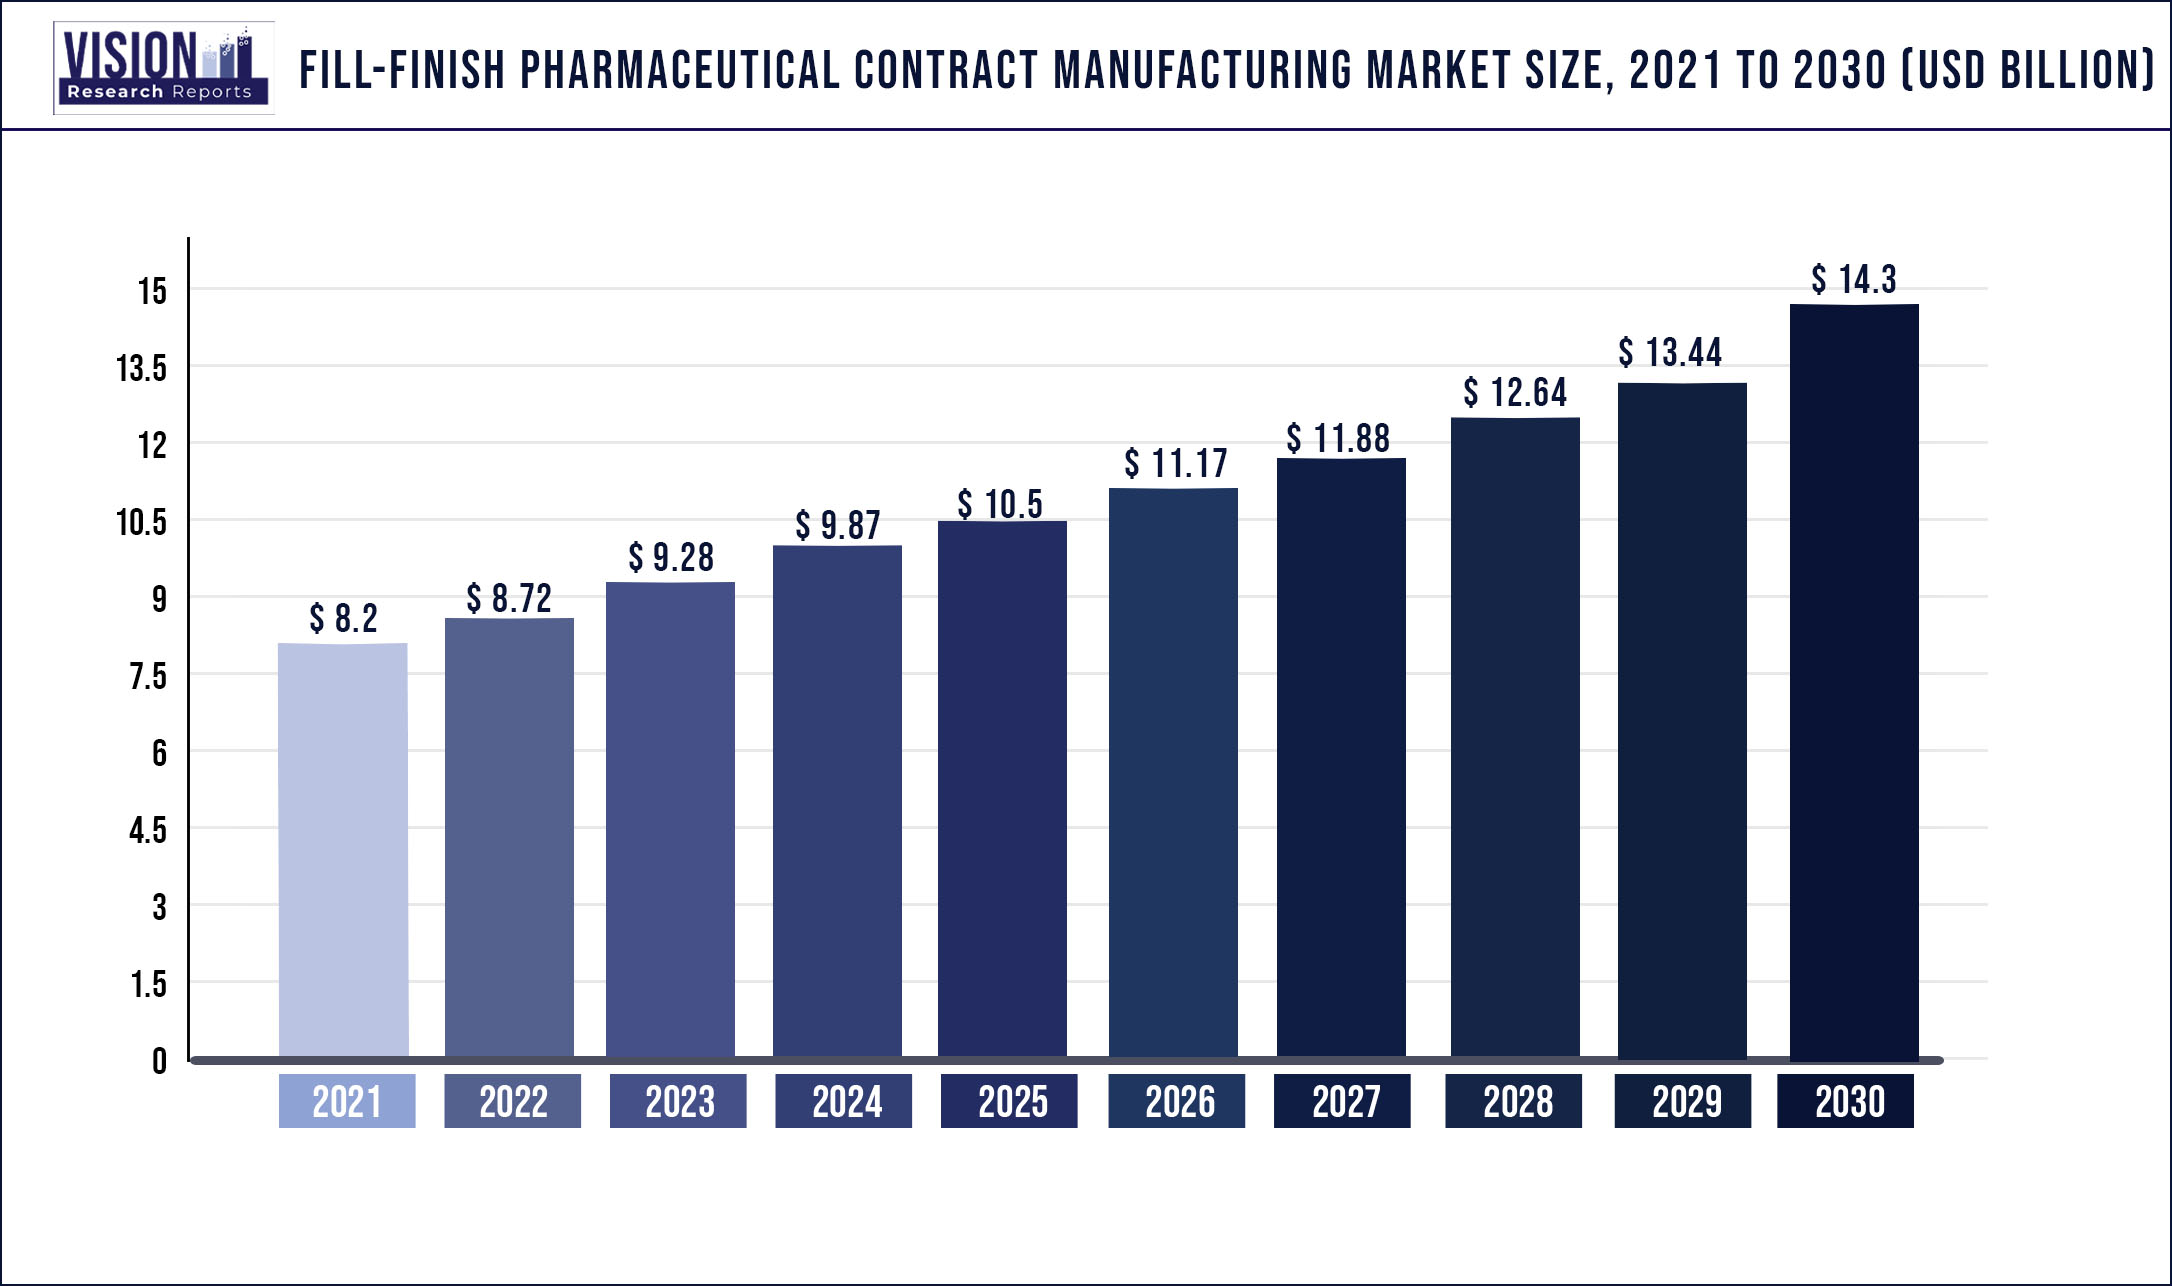 Fill-finish Pharmaceutical Contract Manufacturing Market Size 2021 to 2030